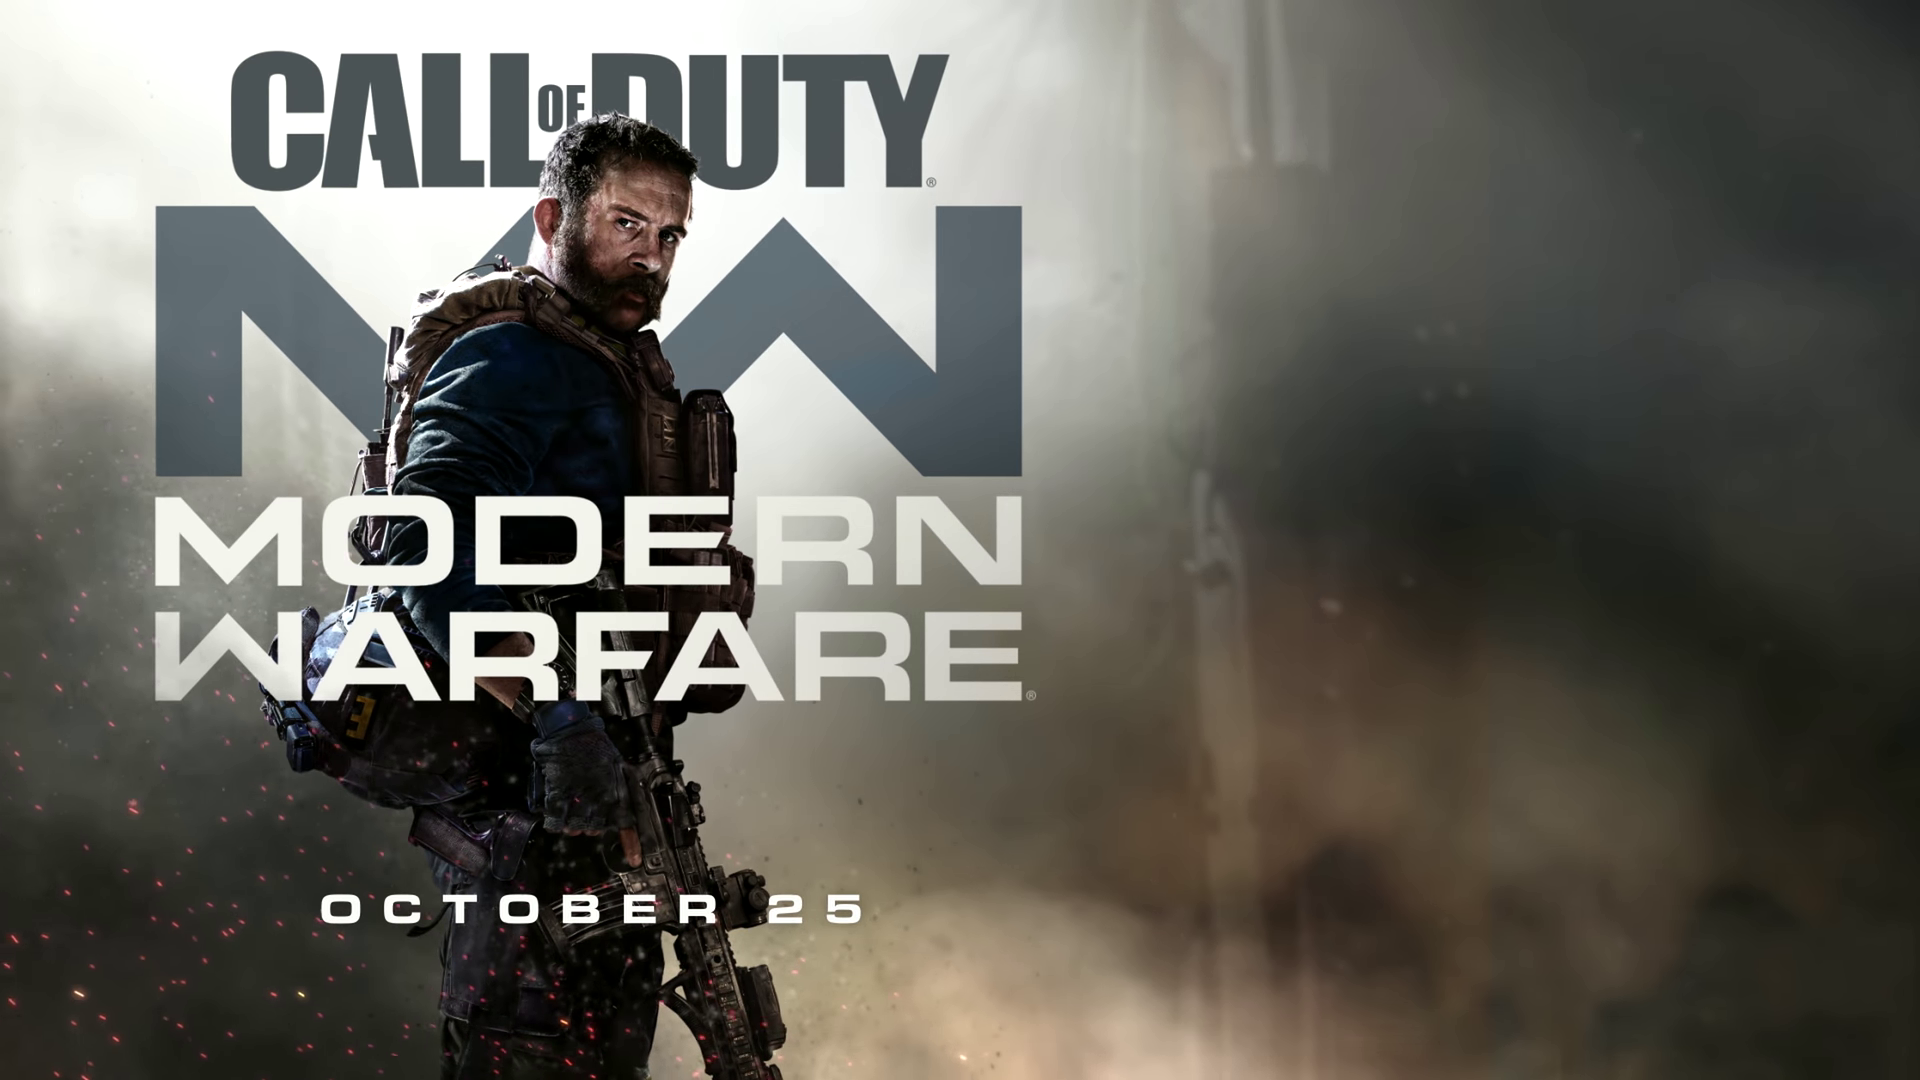 Call of Duty Modern Warfare Creates Its First Backlash With Exclusivity.